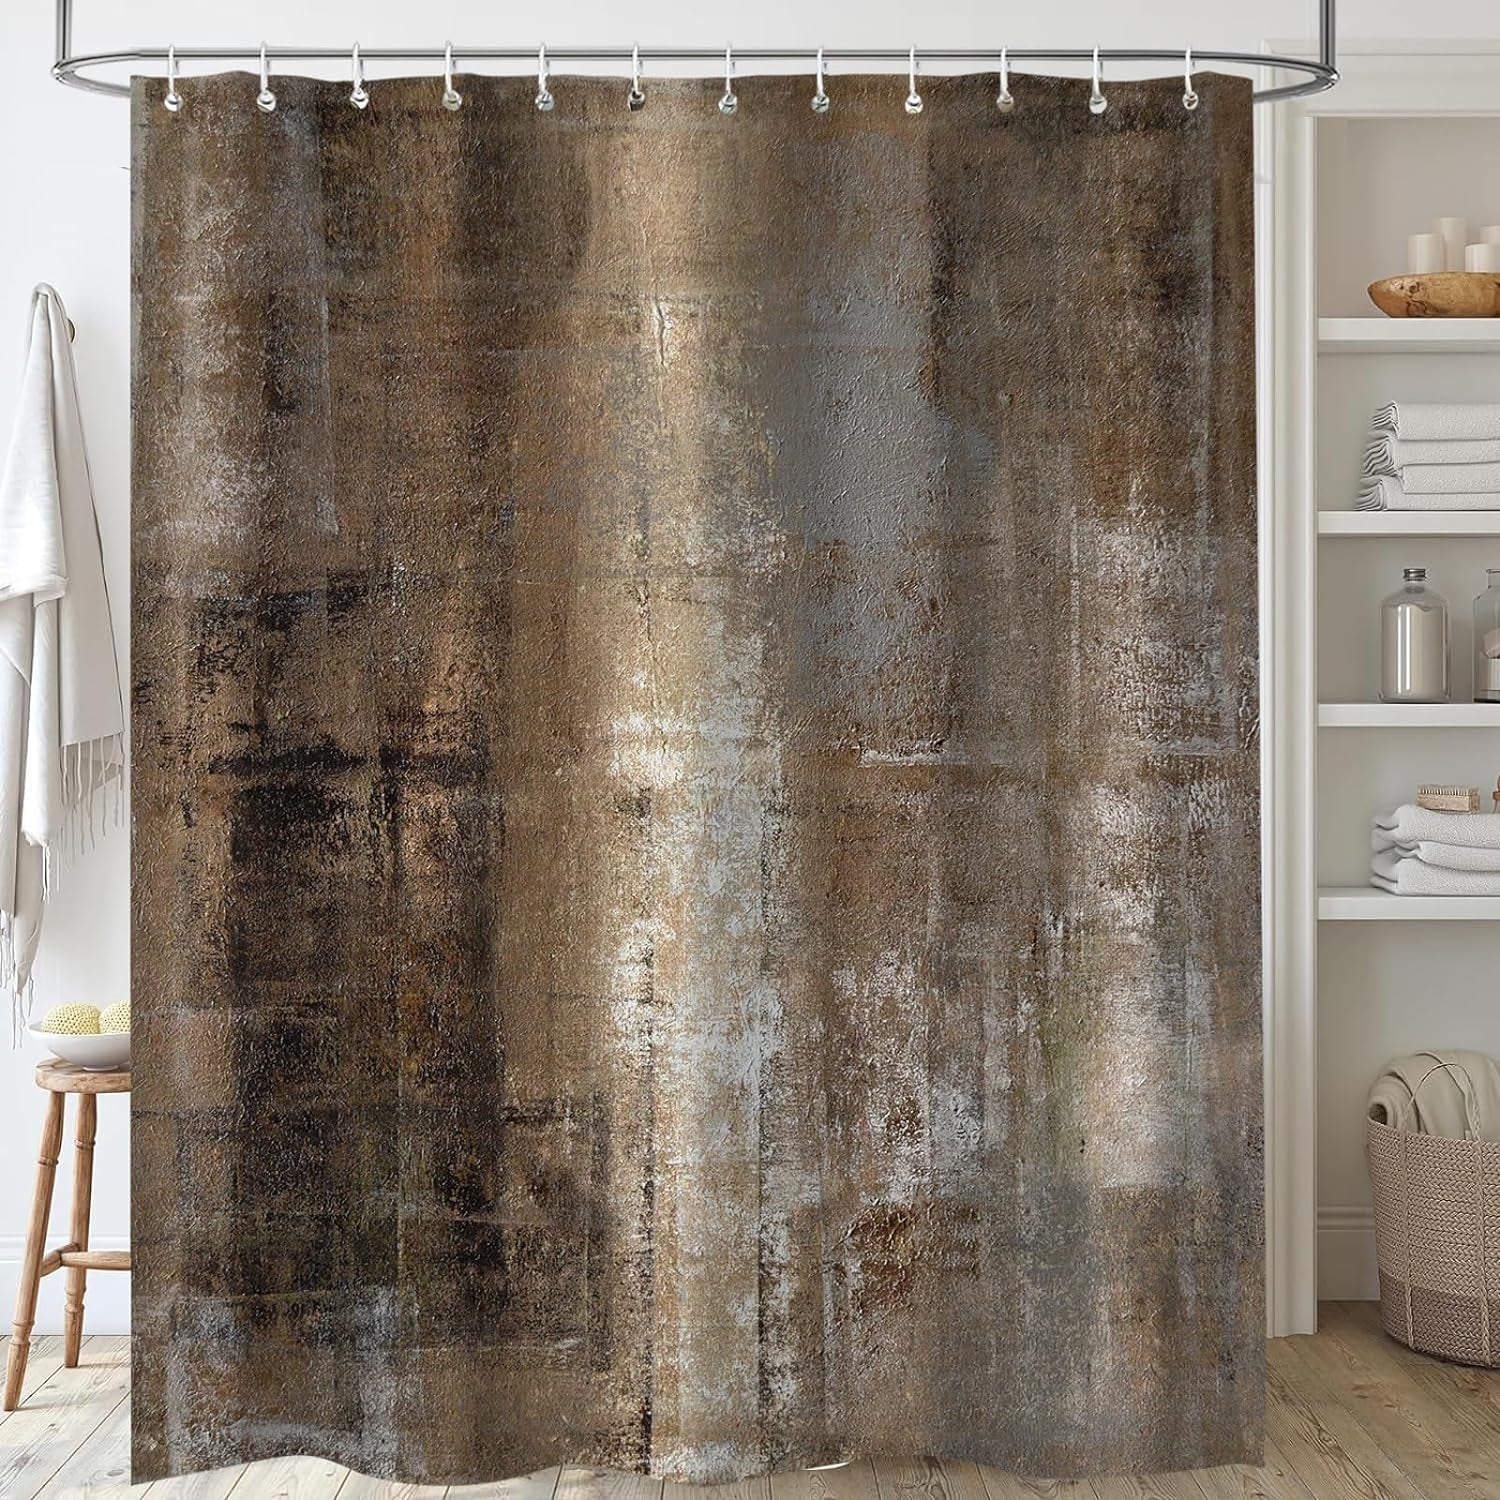 Tan Brown Rustic Shower Curtain, Abstract Wood Copper Vintage Art Acrylic Painting Bath Curtain, Polyester Fabric Waterproof Bathroom Decor with 12 Hooks, 72X72 In